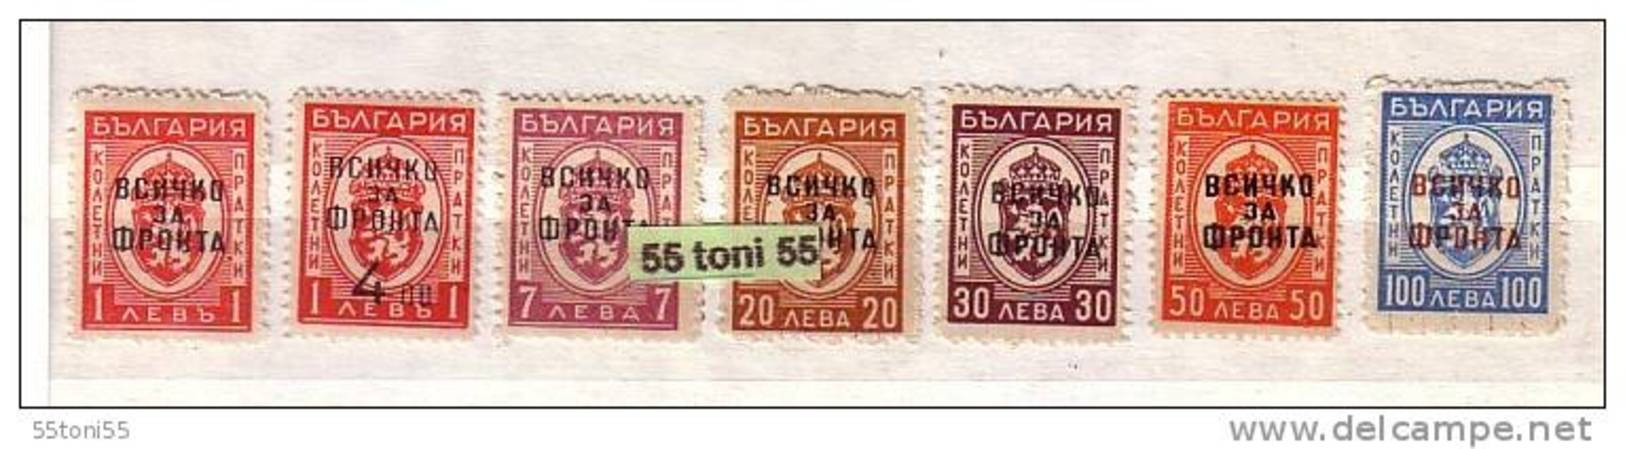 1945 War Stamp Of 44 Overprinted (everything For Front) 7v.- MNH Bulgaria/ Bulgarie - Official Stamps